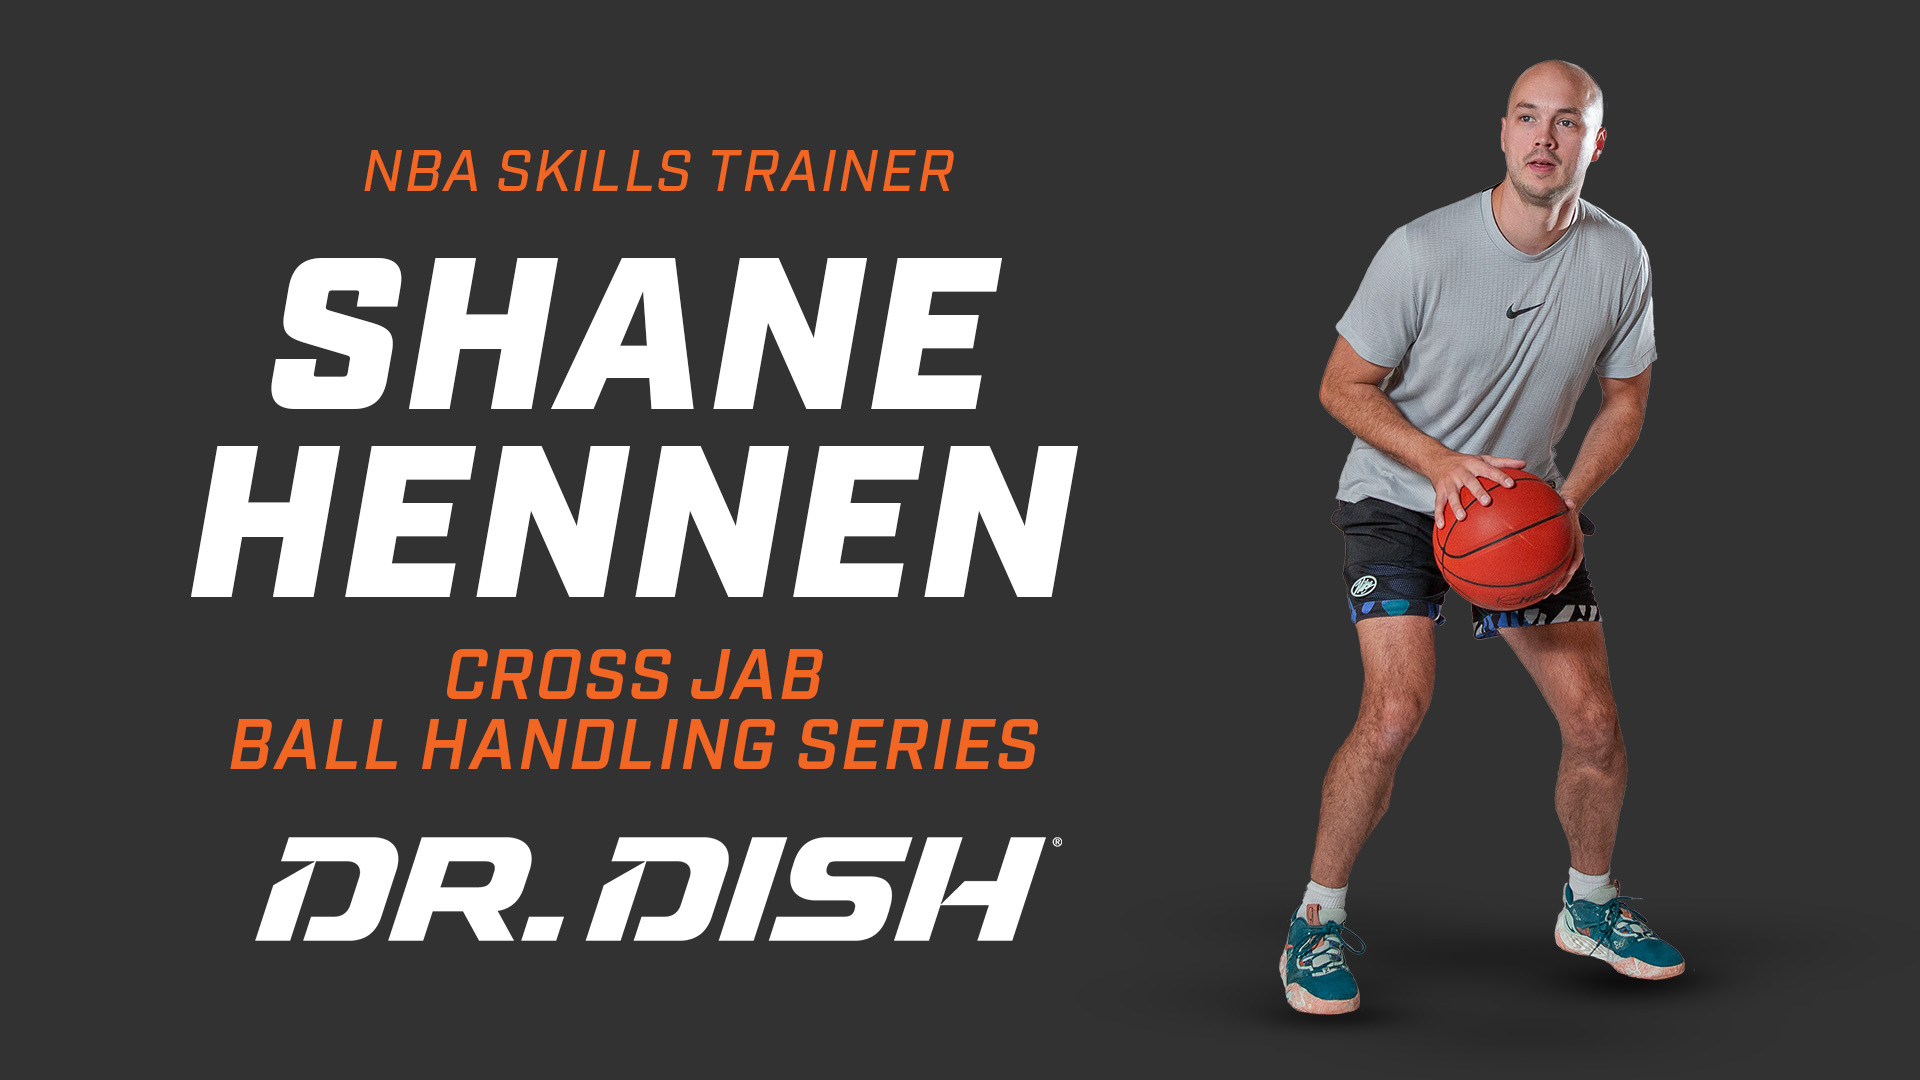 Basketball Drills: One Hand Pickup Warmup with Shane Hennen